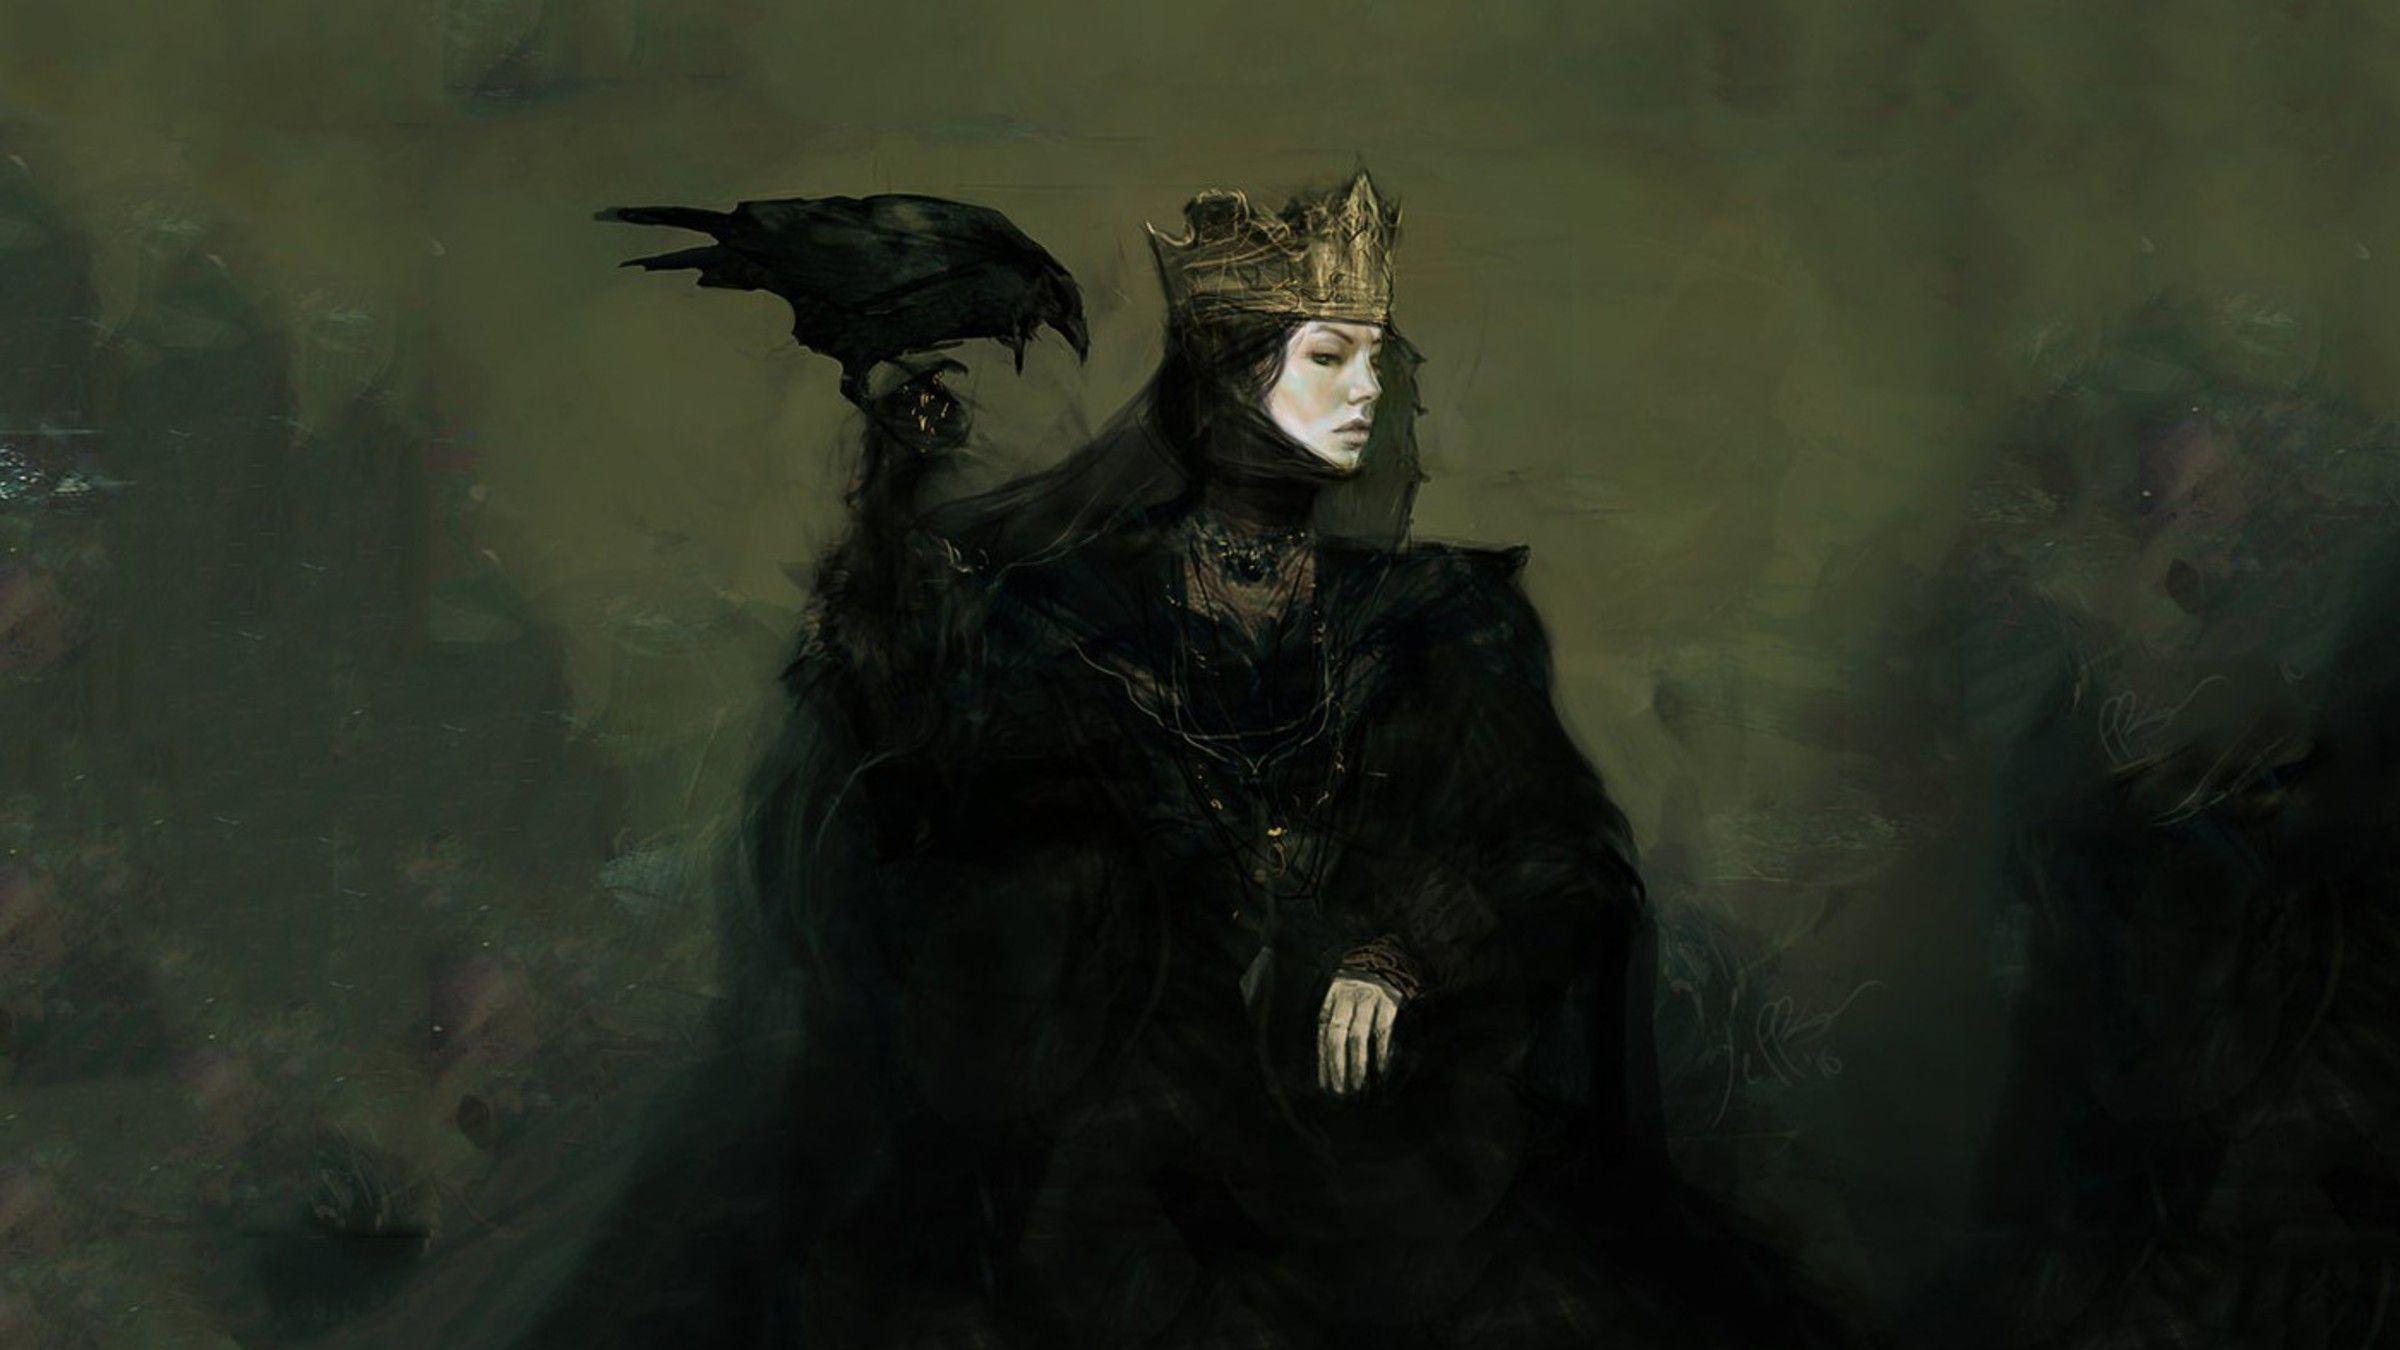 Evil queen snow white and the huntsman wallpaper